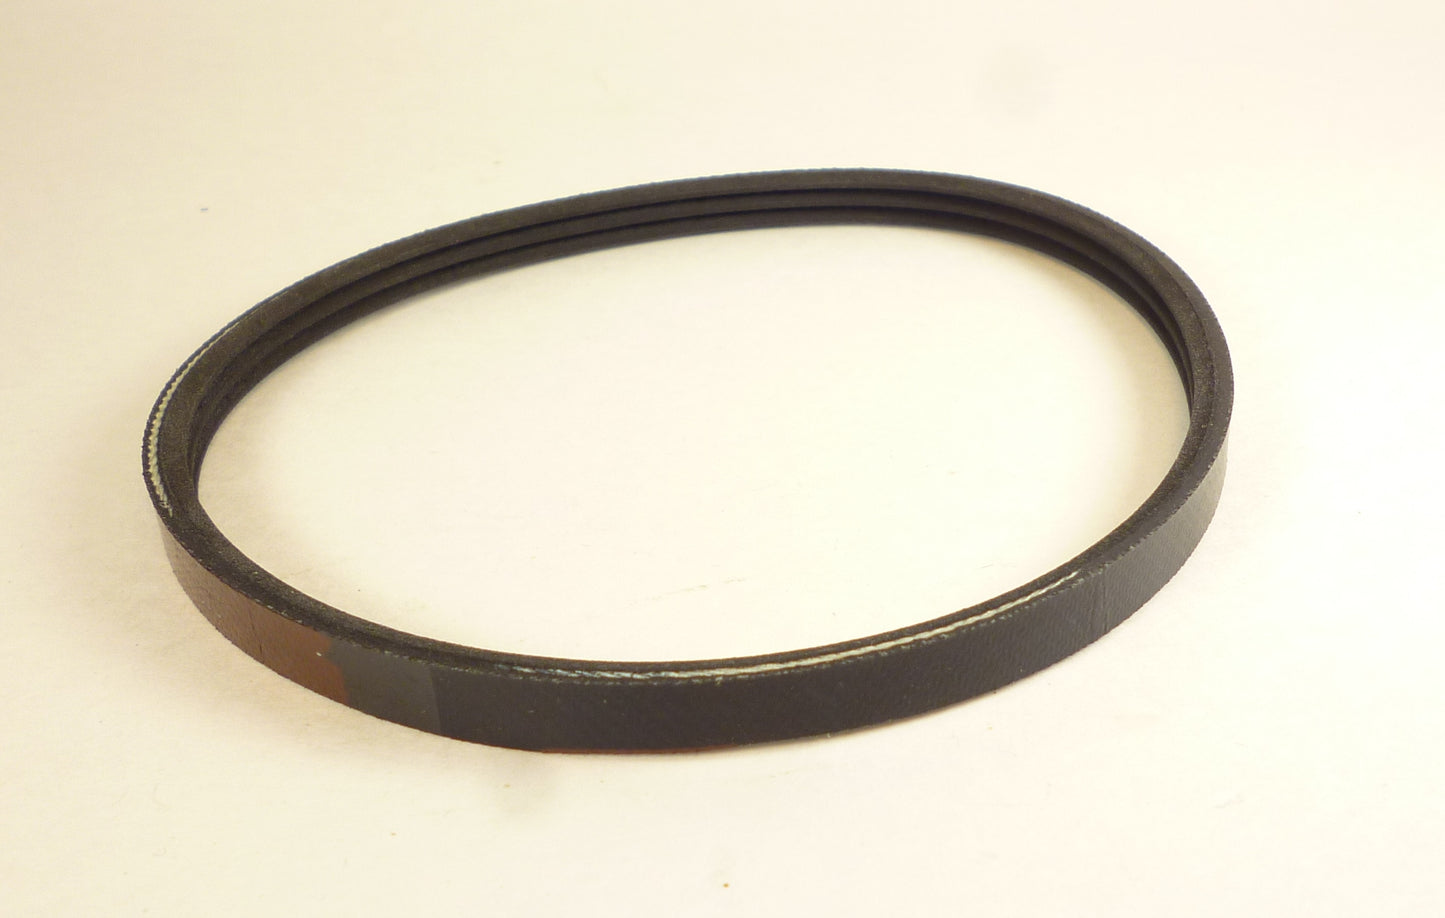 BRUNO SR1540 Lift Replacement Ribbed Drive BELT